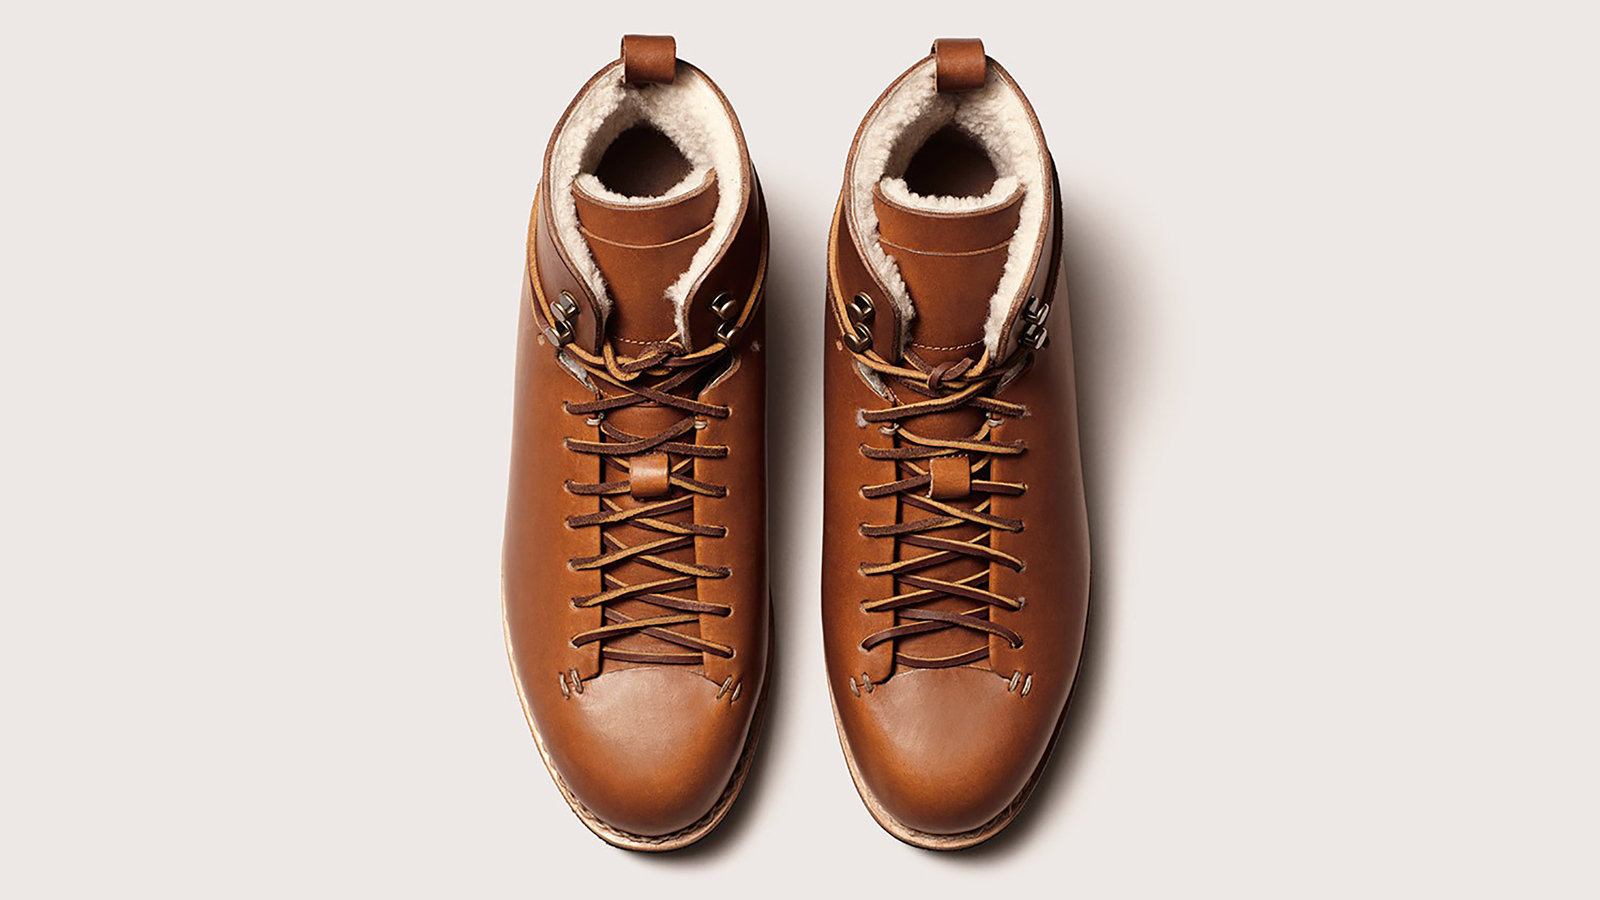 Trekking Shoes: The FEIT Wool Hiker Might be the Plushest Boots in 